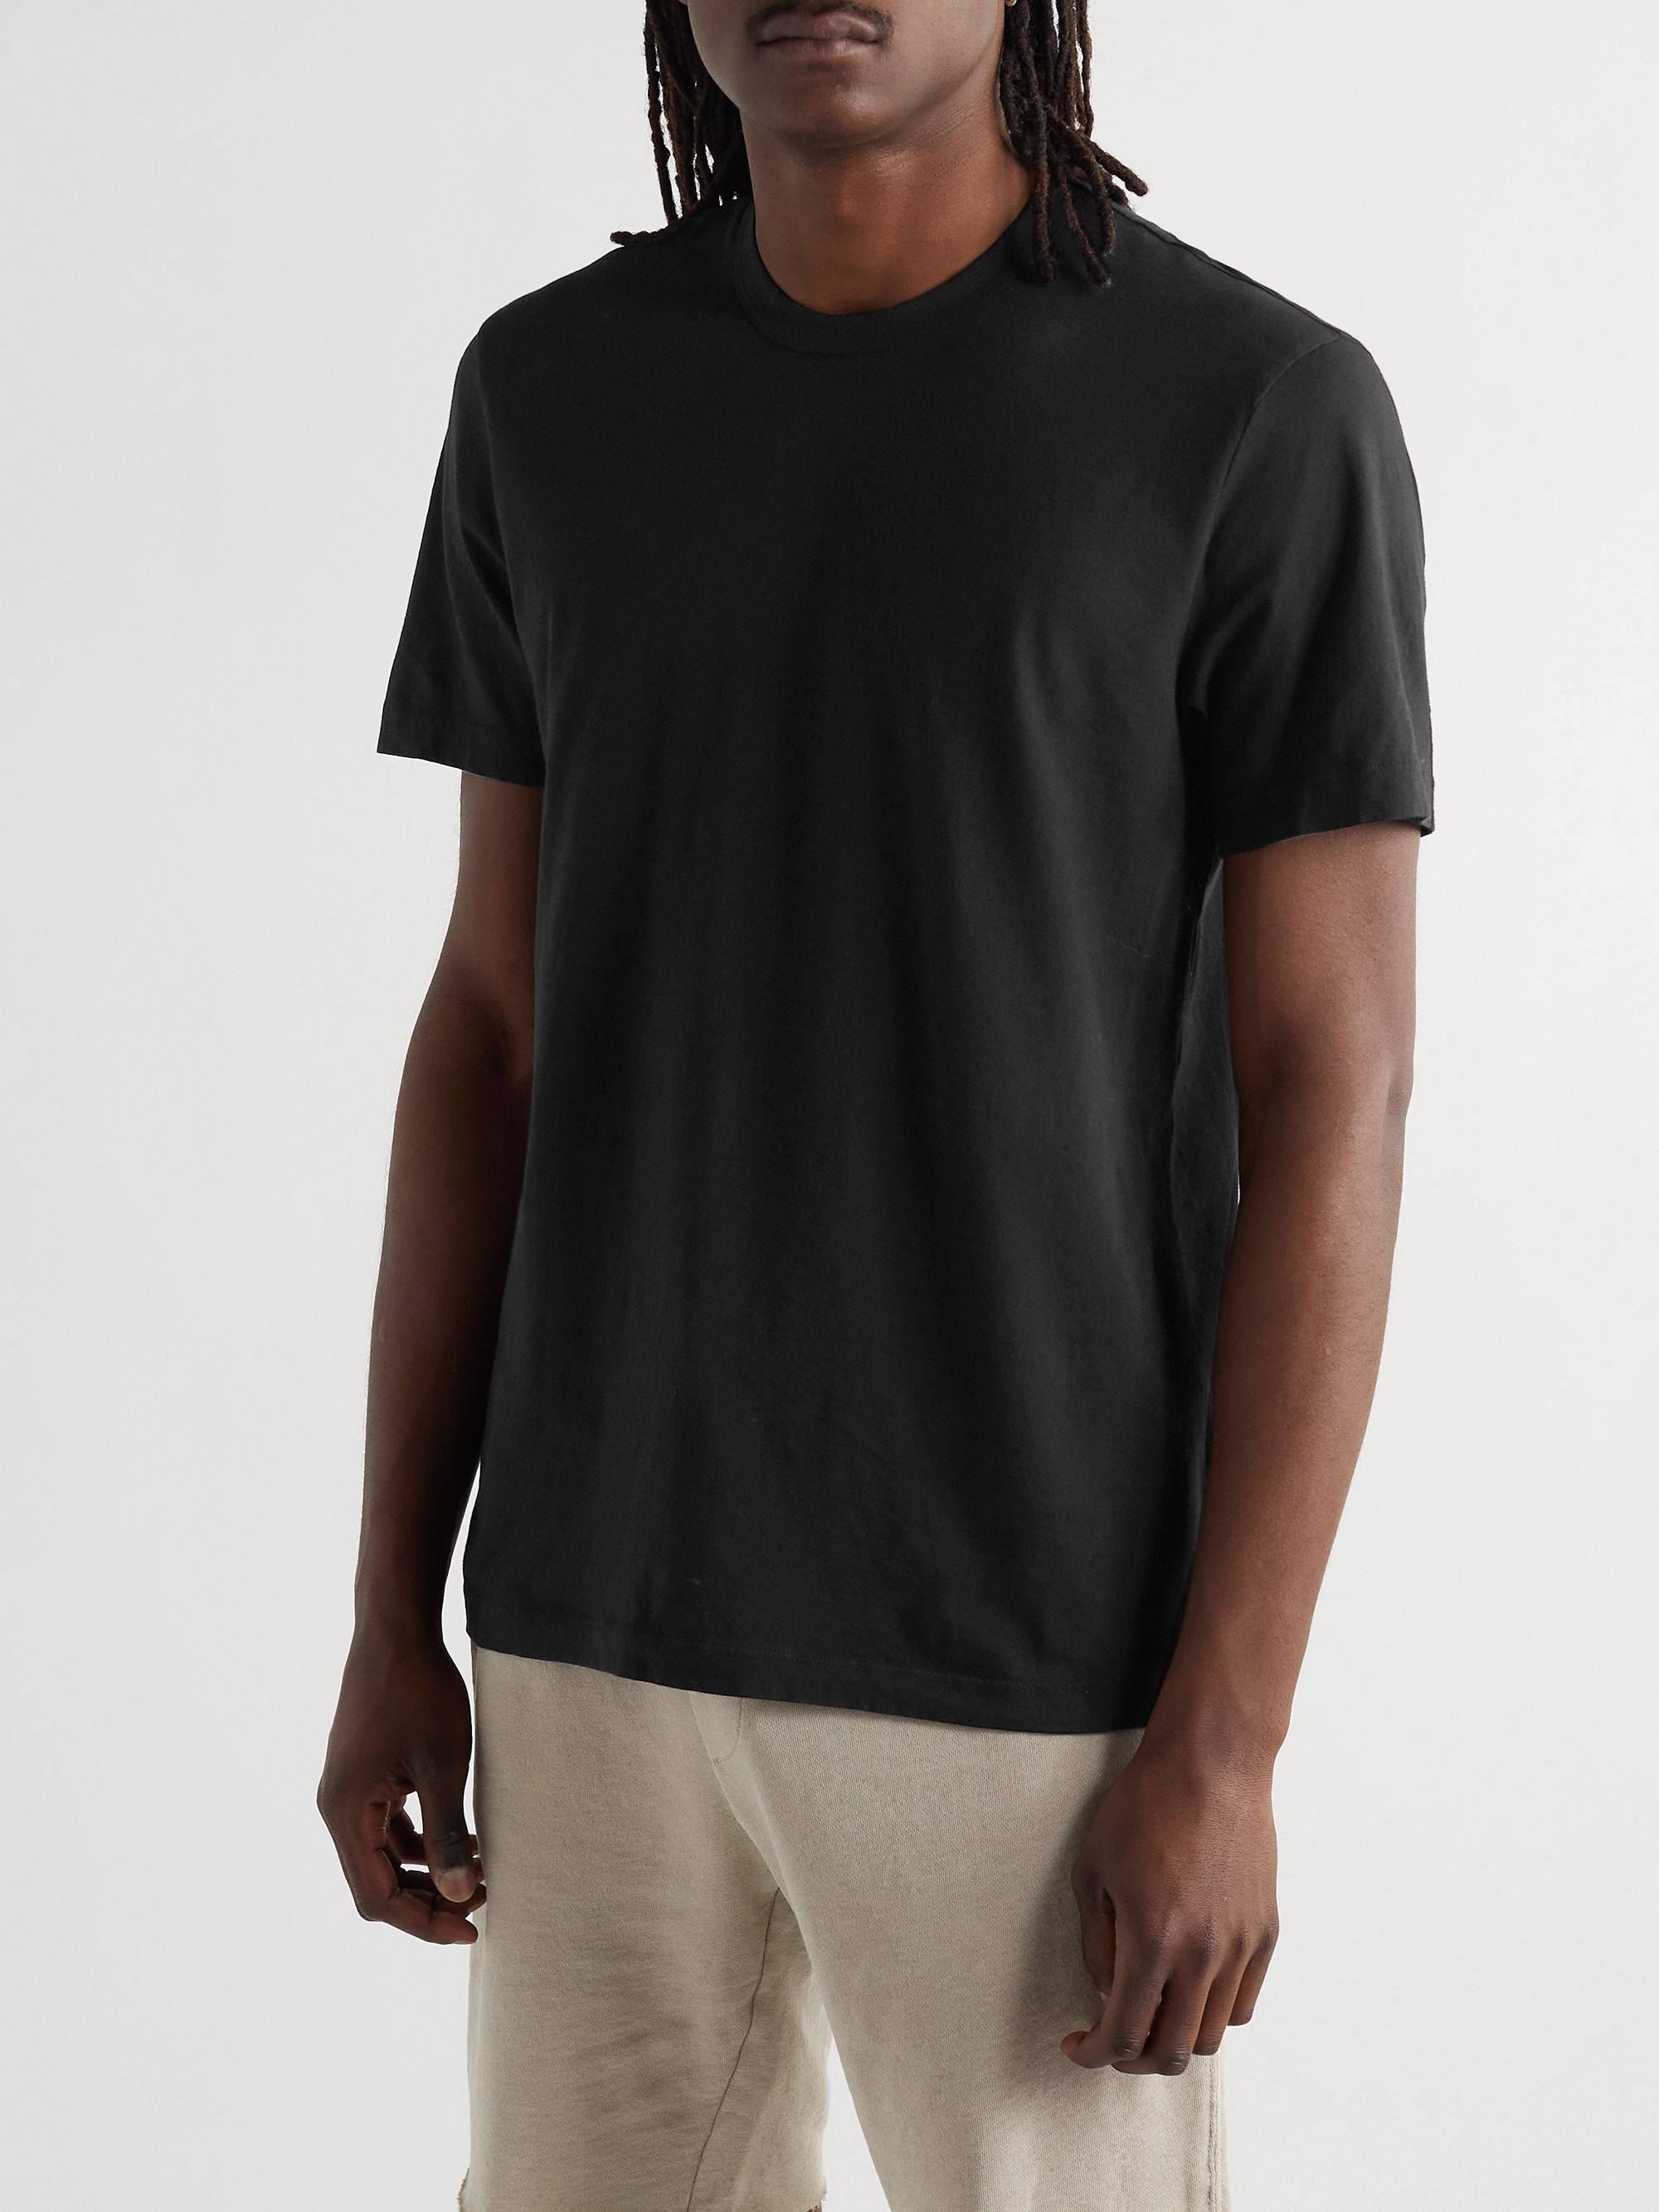 Black Combed Cotton-Jersey T-Shirt | JAMES PERSE | MR PORTER